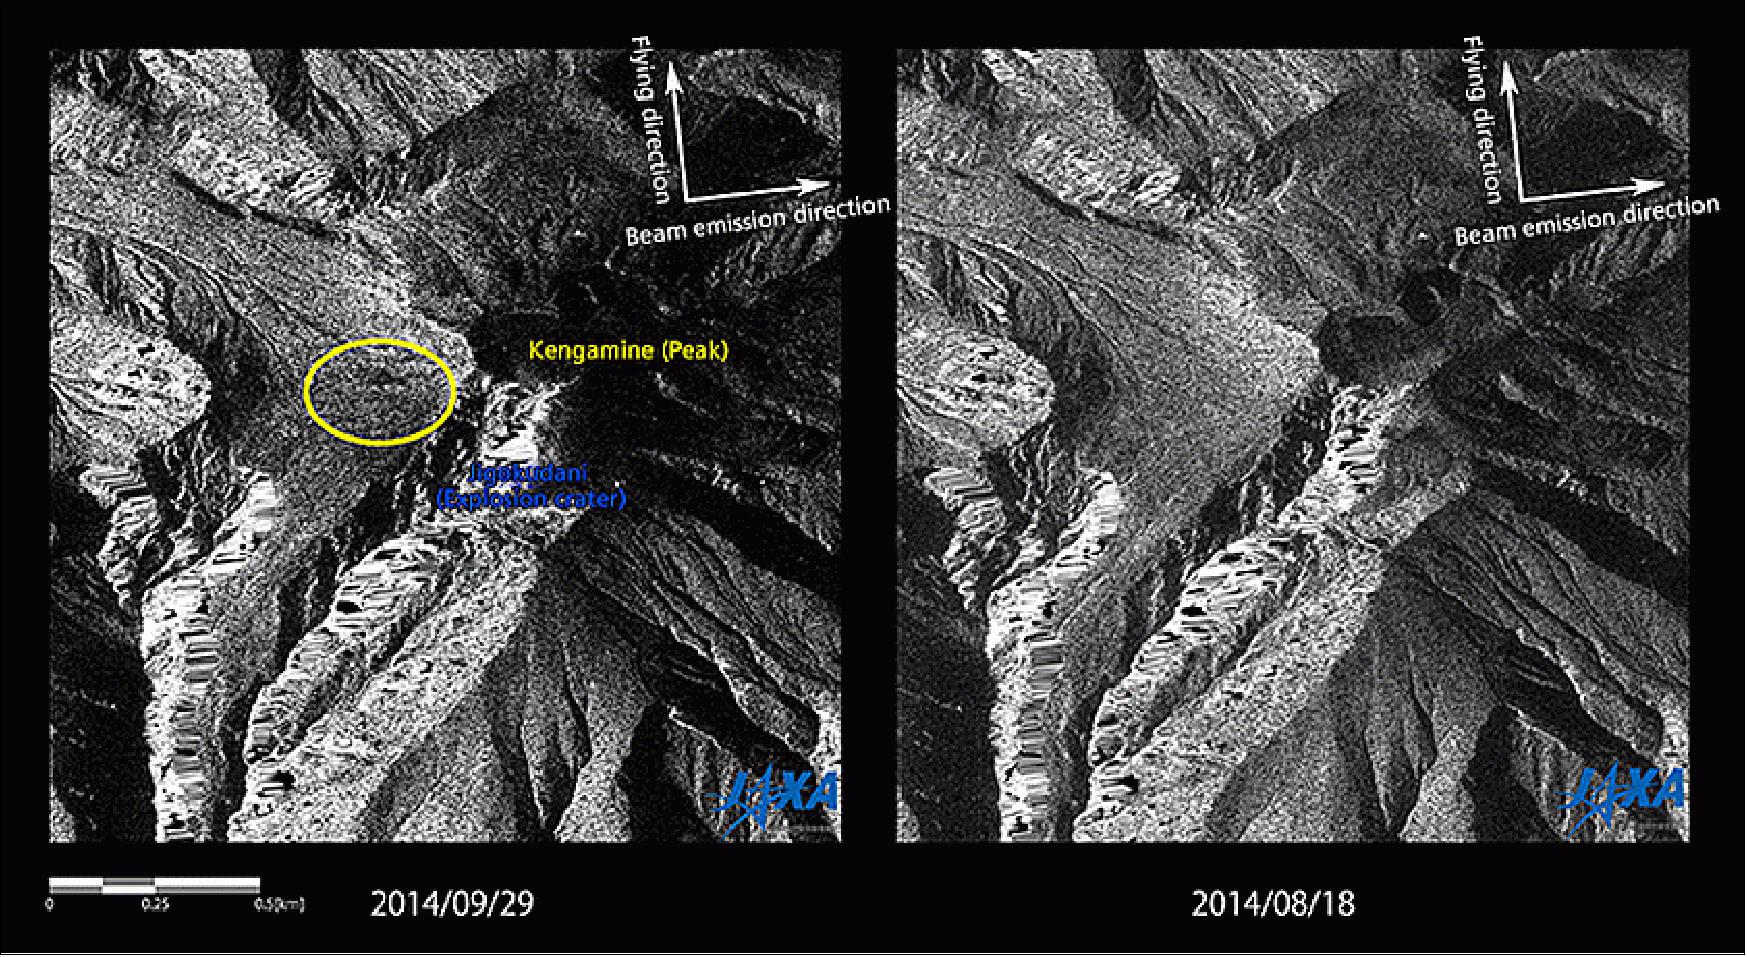 Figure 55: Comparison before and after the eruption near the peak of Mt. Ontake. No depression was found prior to the eruption in the area circled in yellow (image credit: JAXA)